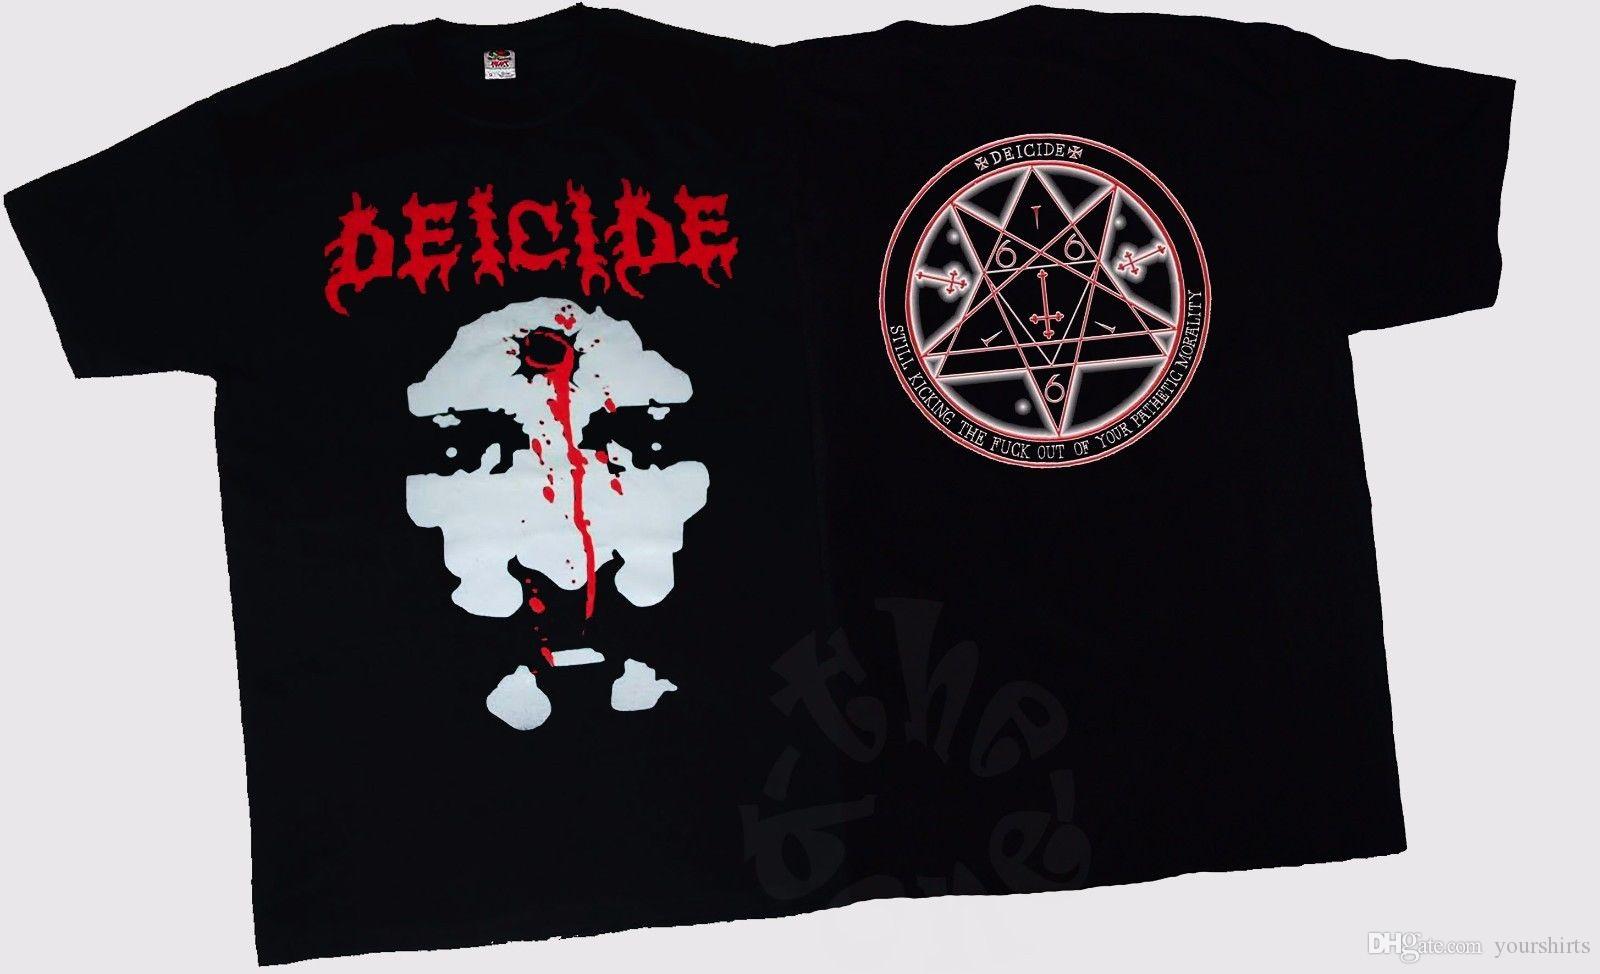 Deicide American Death Metal Band, T Shirt Sizes S - Deicide Poster , HD Wallpaper & Backgrounds